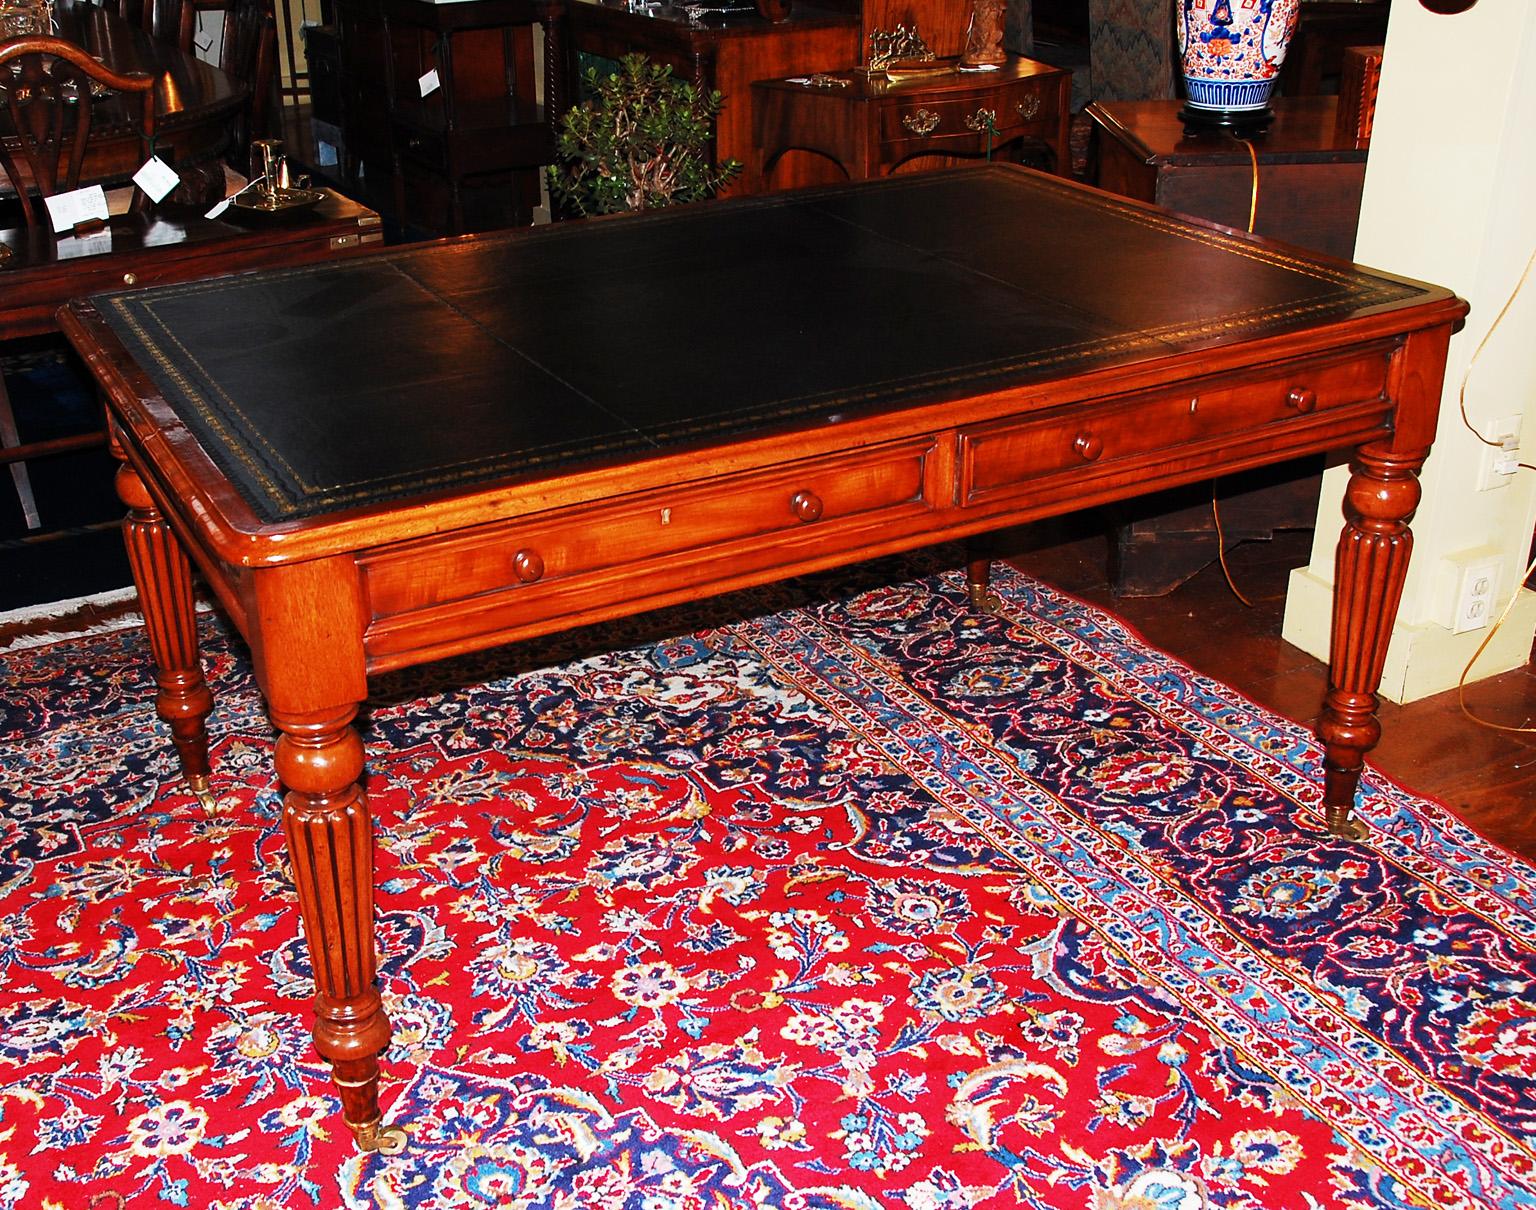 Early Victorian English Mid 19th Century Executive Writing Table, Reeded Legs Black Leather Top